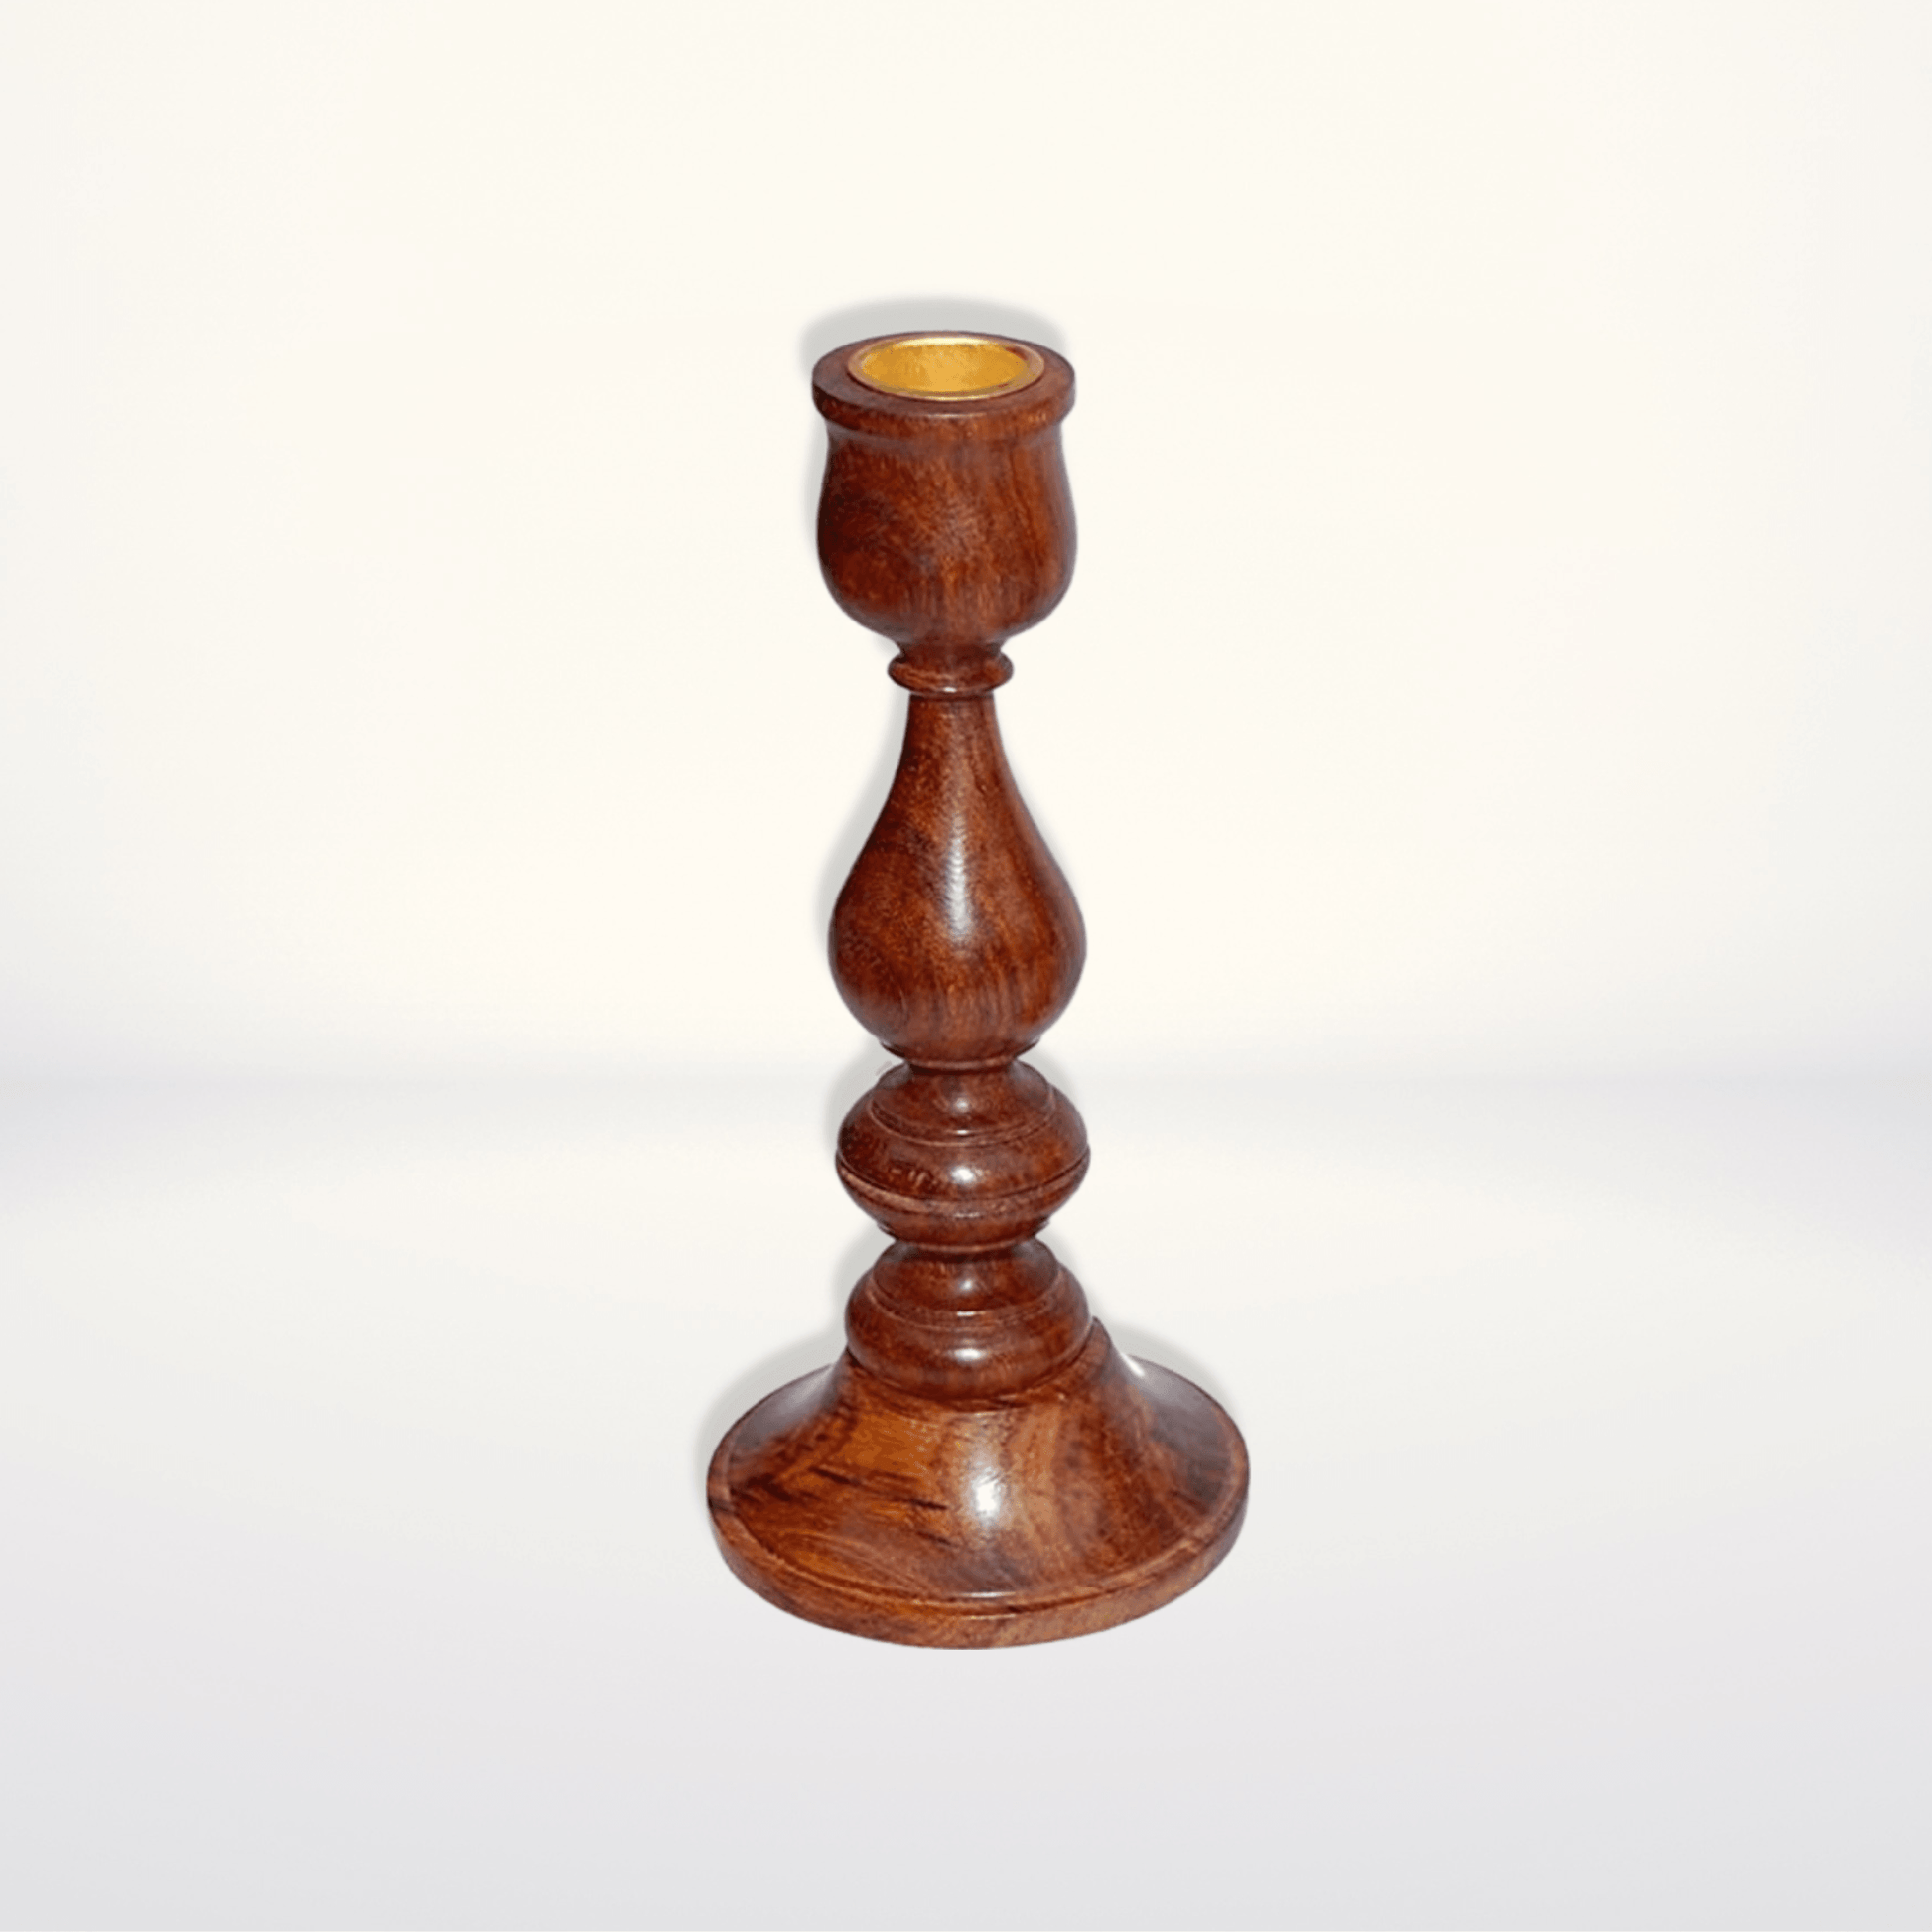 Handcrafted Wooden Candlestick Holder - Classic Design - Stylla London